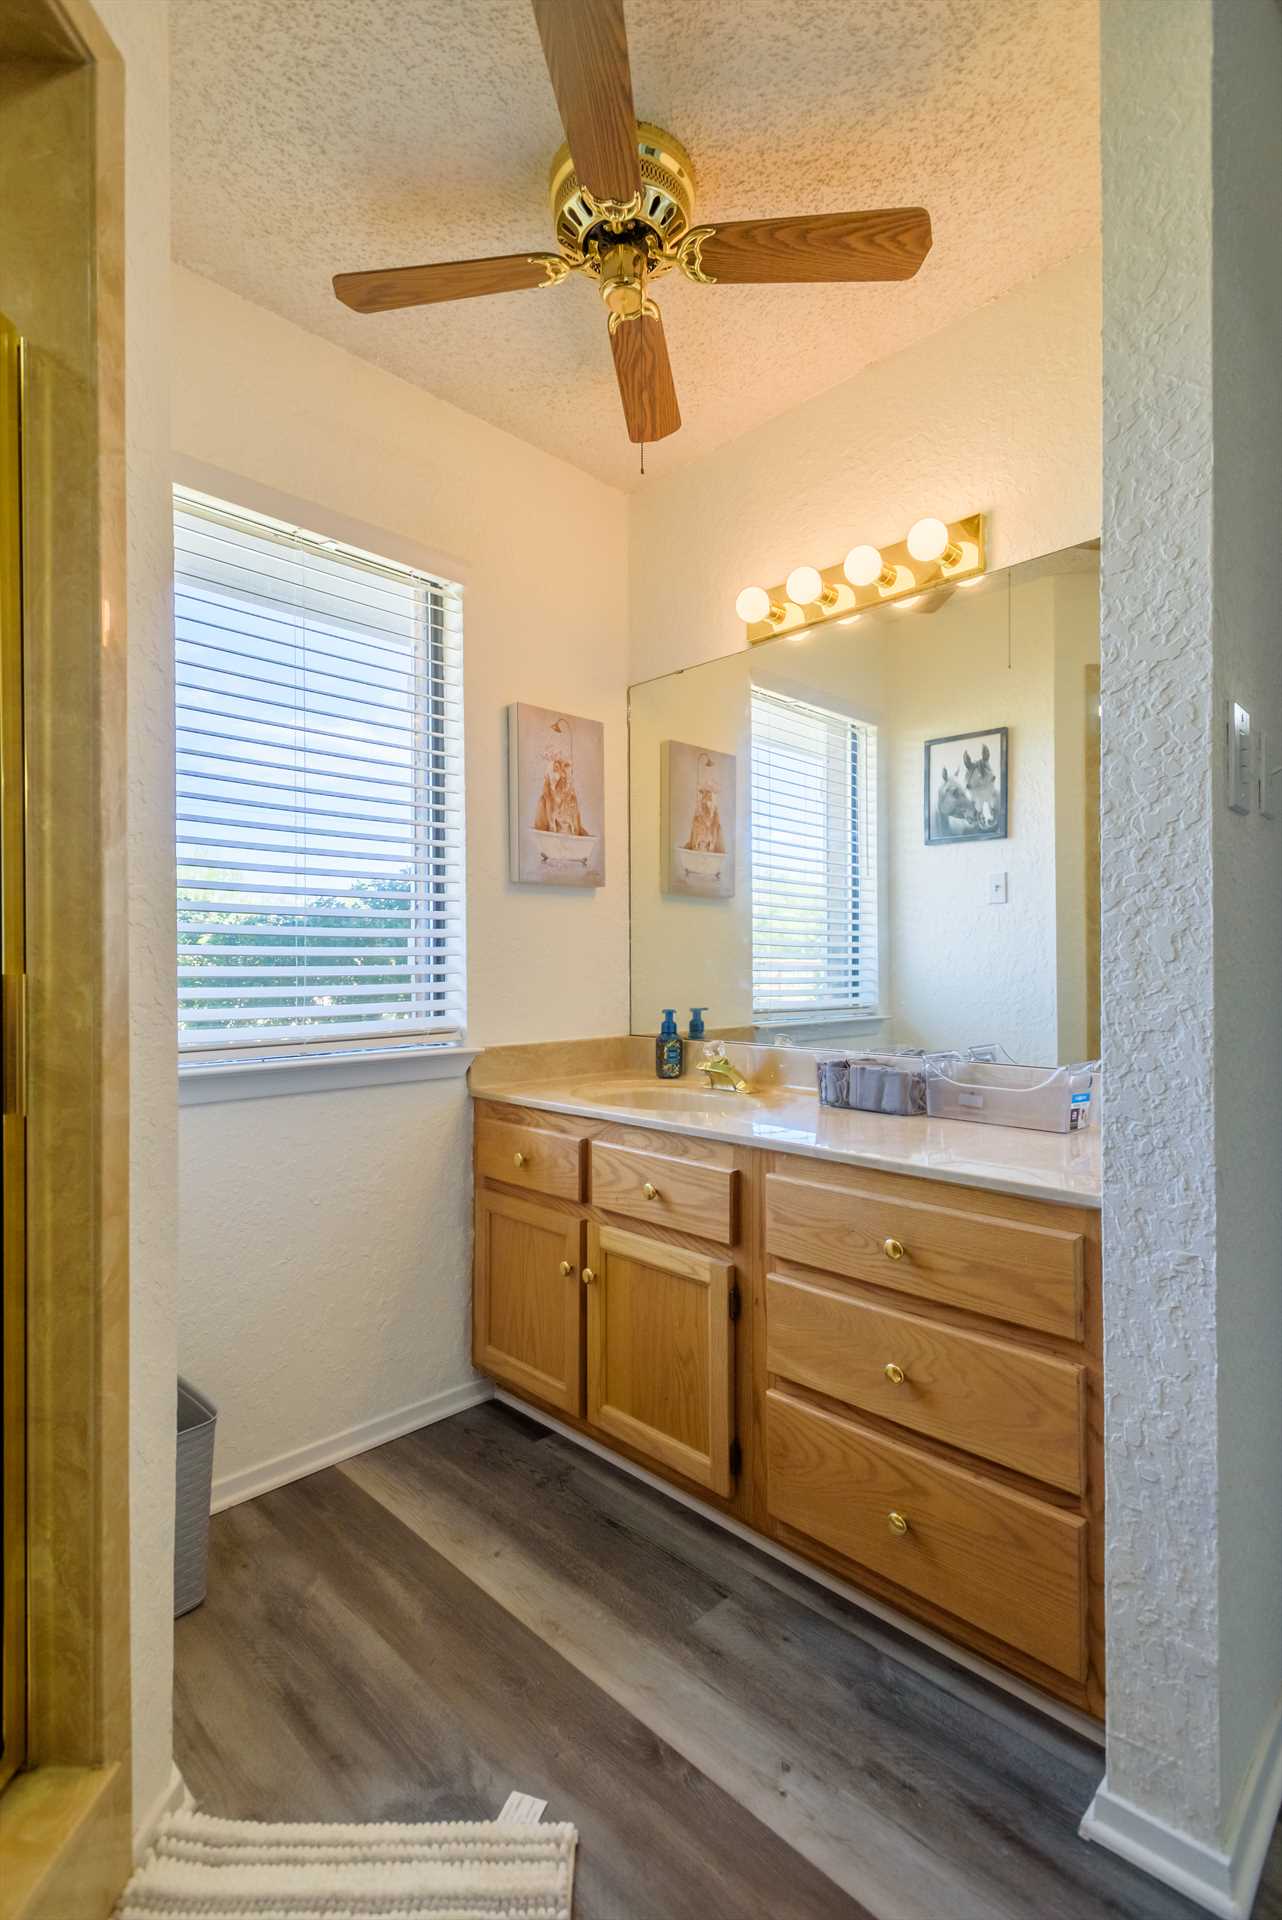                                                 Shared between the second and third bedrooms, the second full bath features a single vanity and plenty of fresh linens.